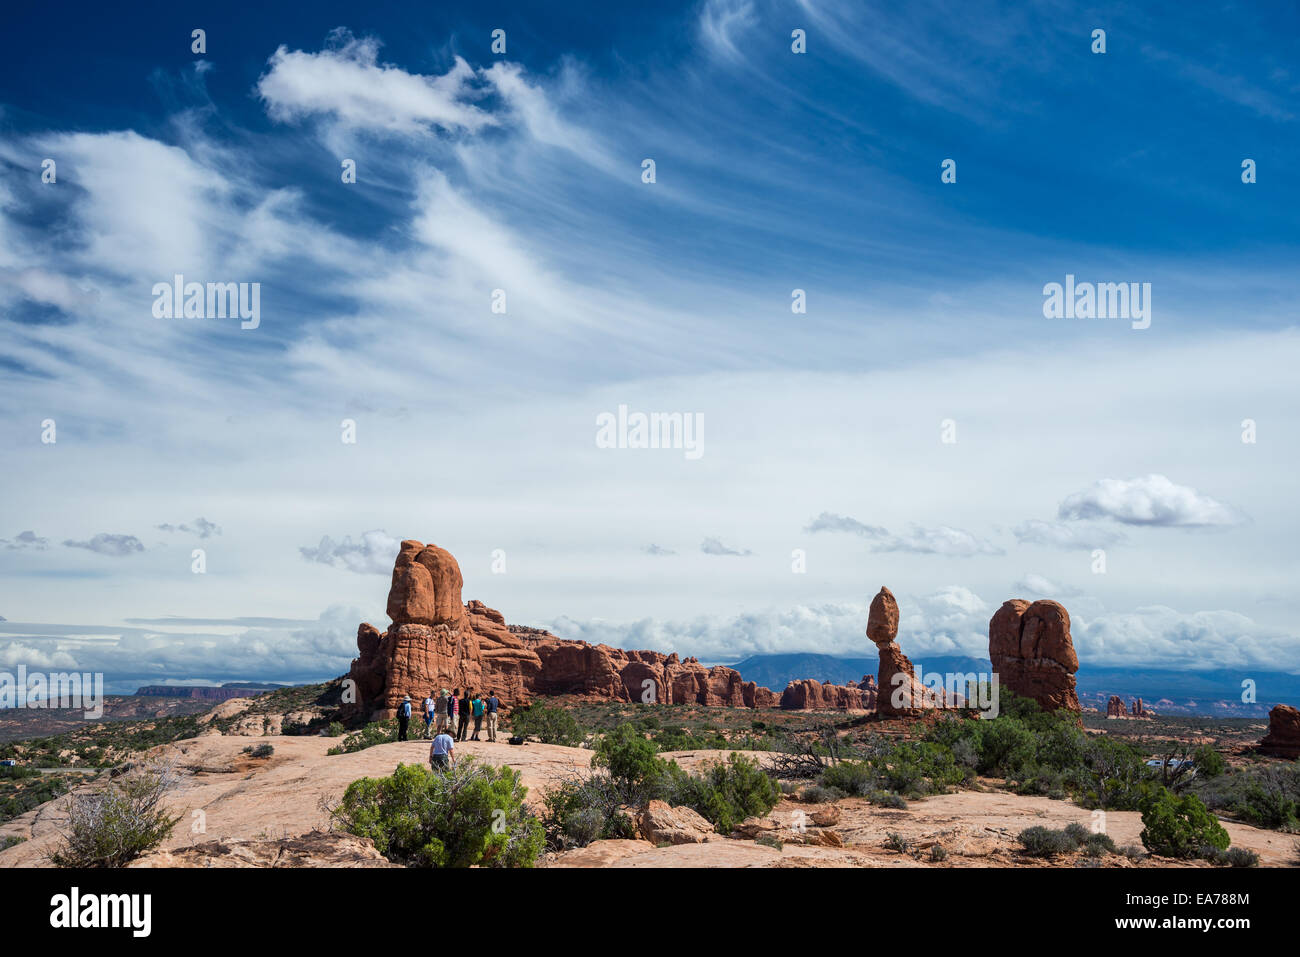 Open space near the Balanced Rock. Arches National Park, Utah, USA. Stock Photo